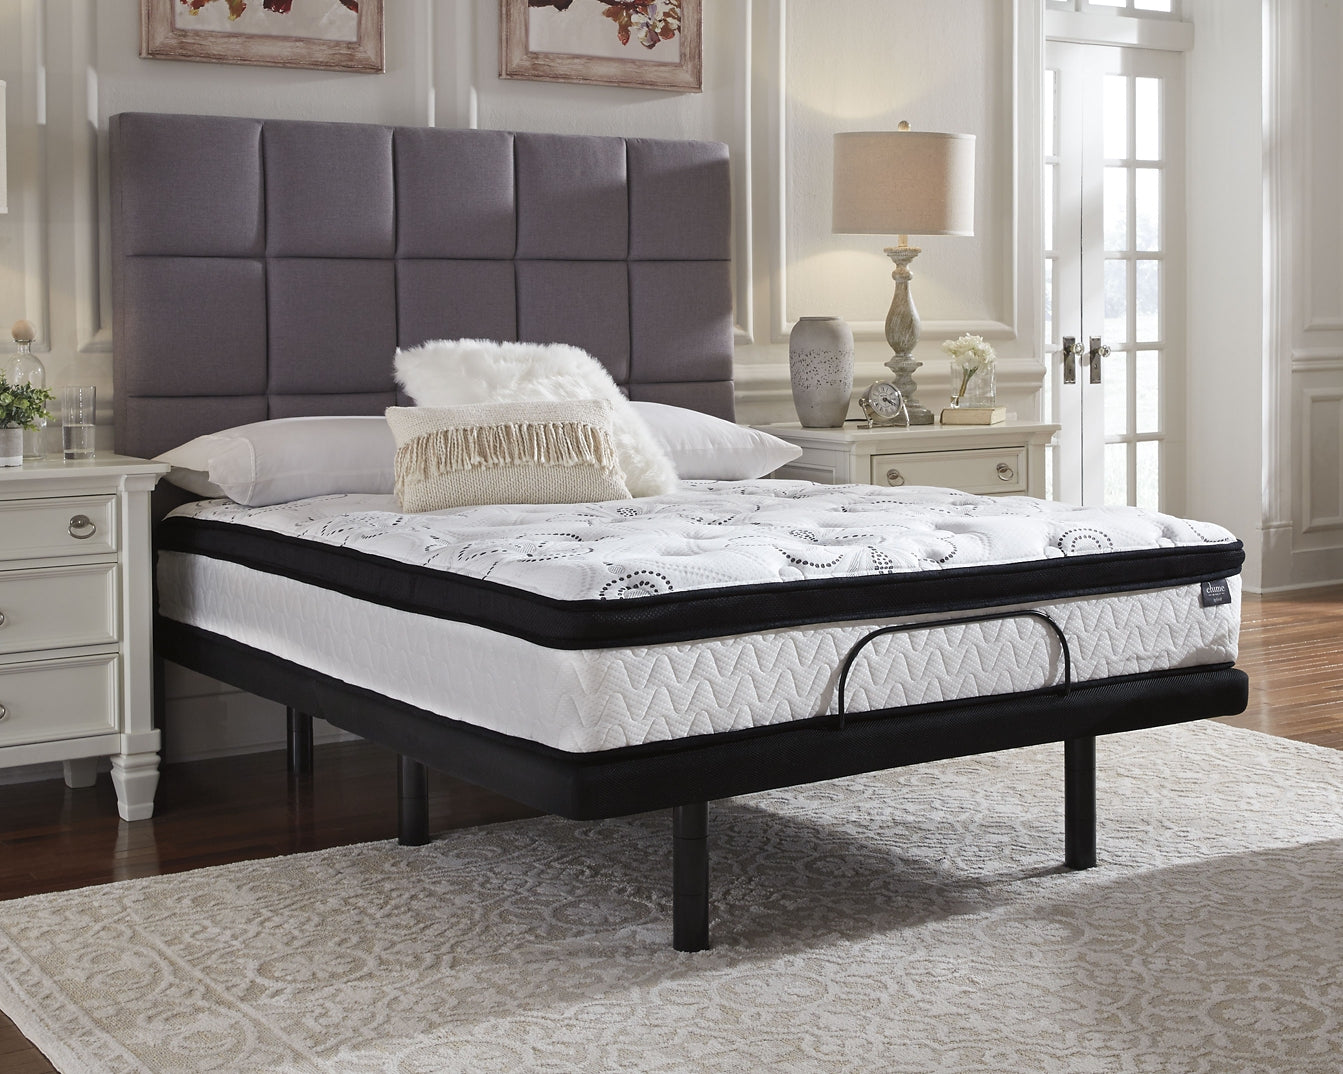 Limited Edition Firm Mattress with Adjustable Base JB's Furniture  Home Furniture, Home Decor, Furniture Store